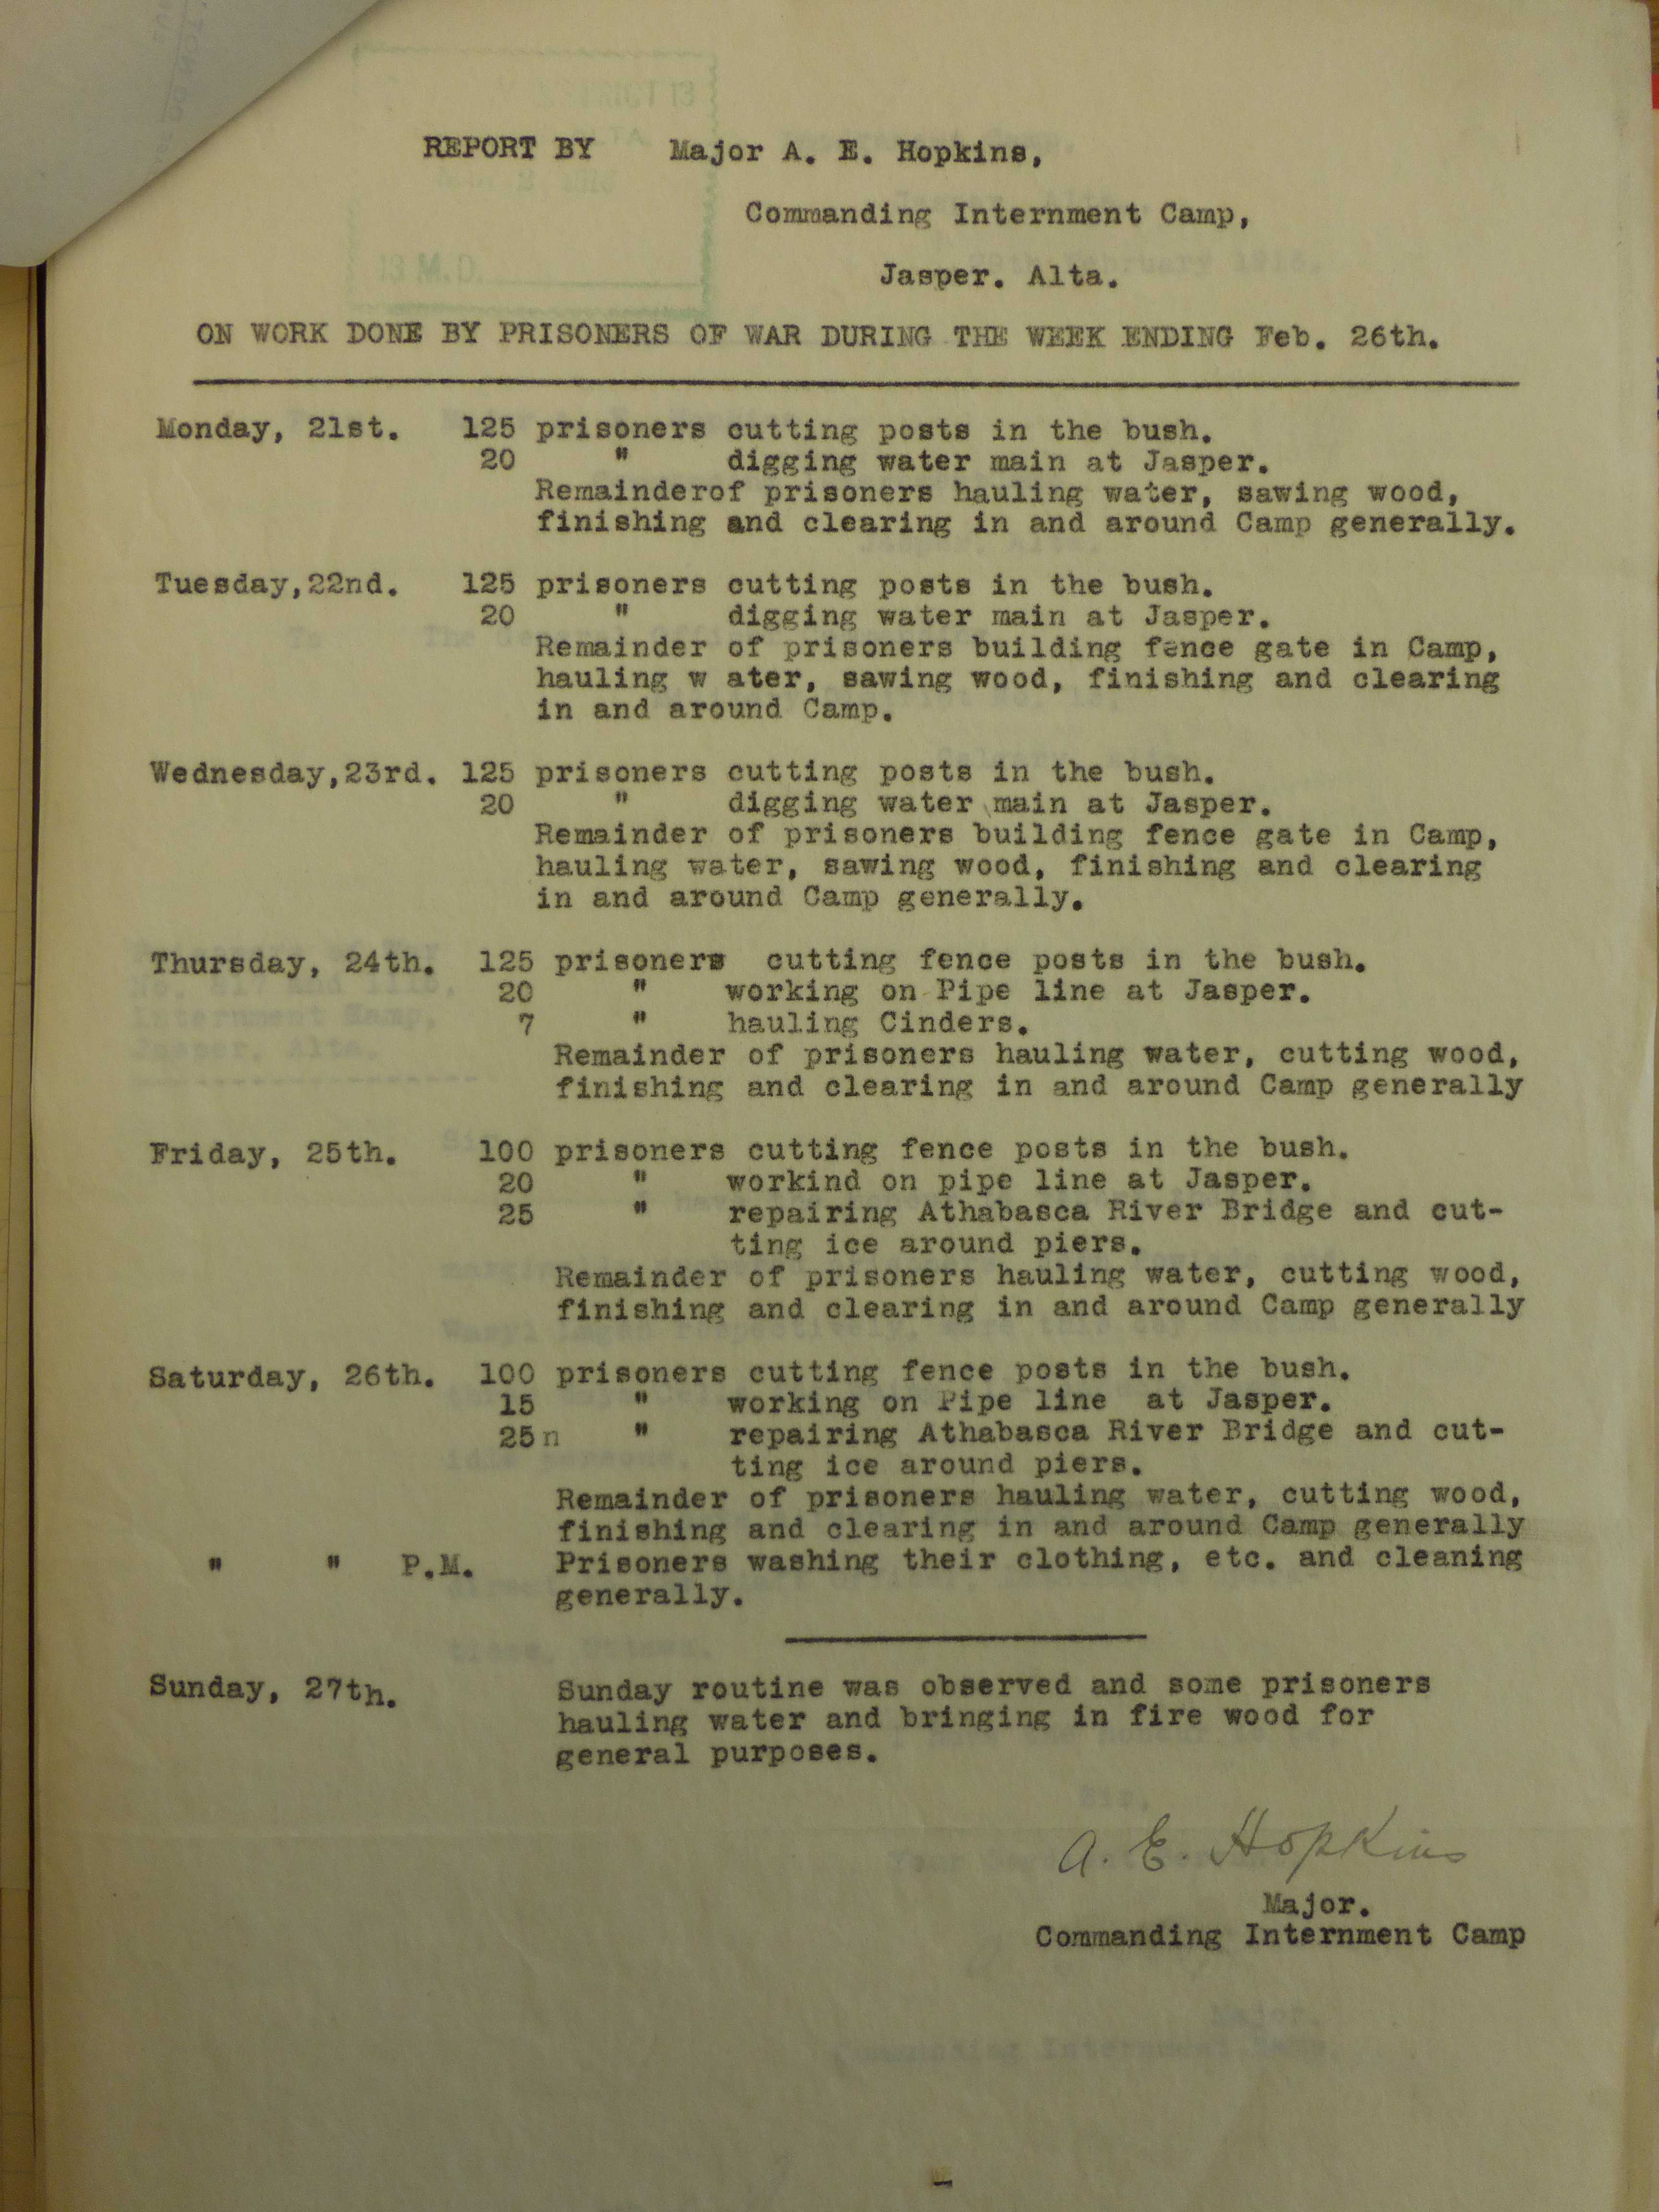 A typed report of daily activities at the Jasper Internment Camp from 21 to 27 February